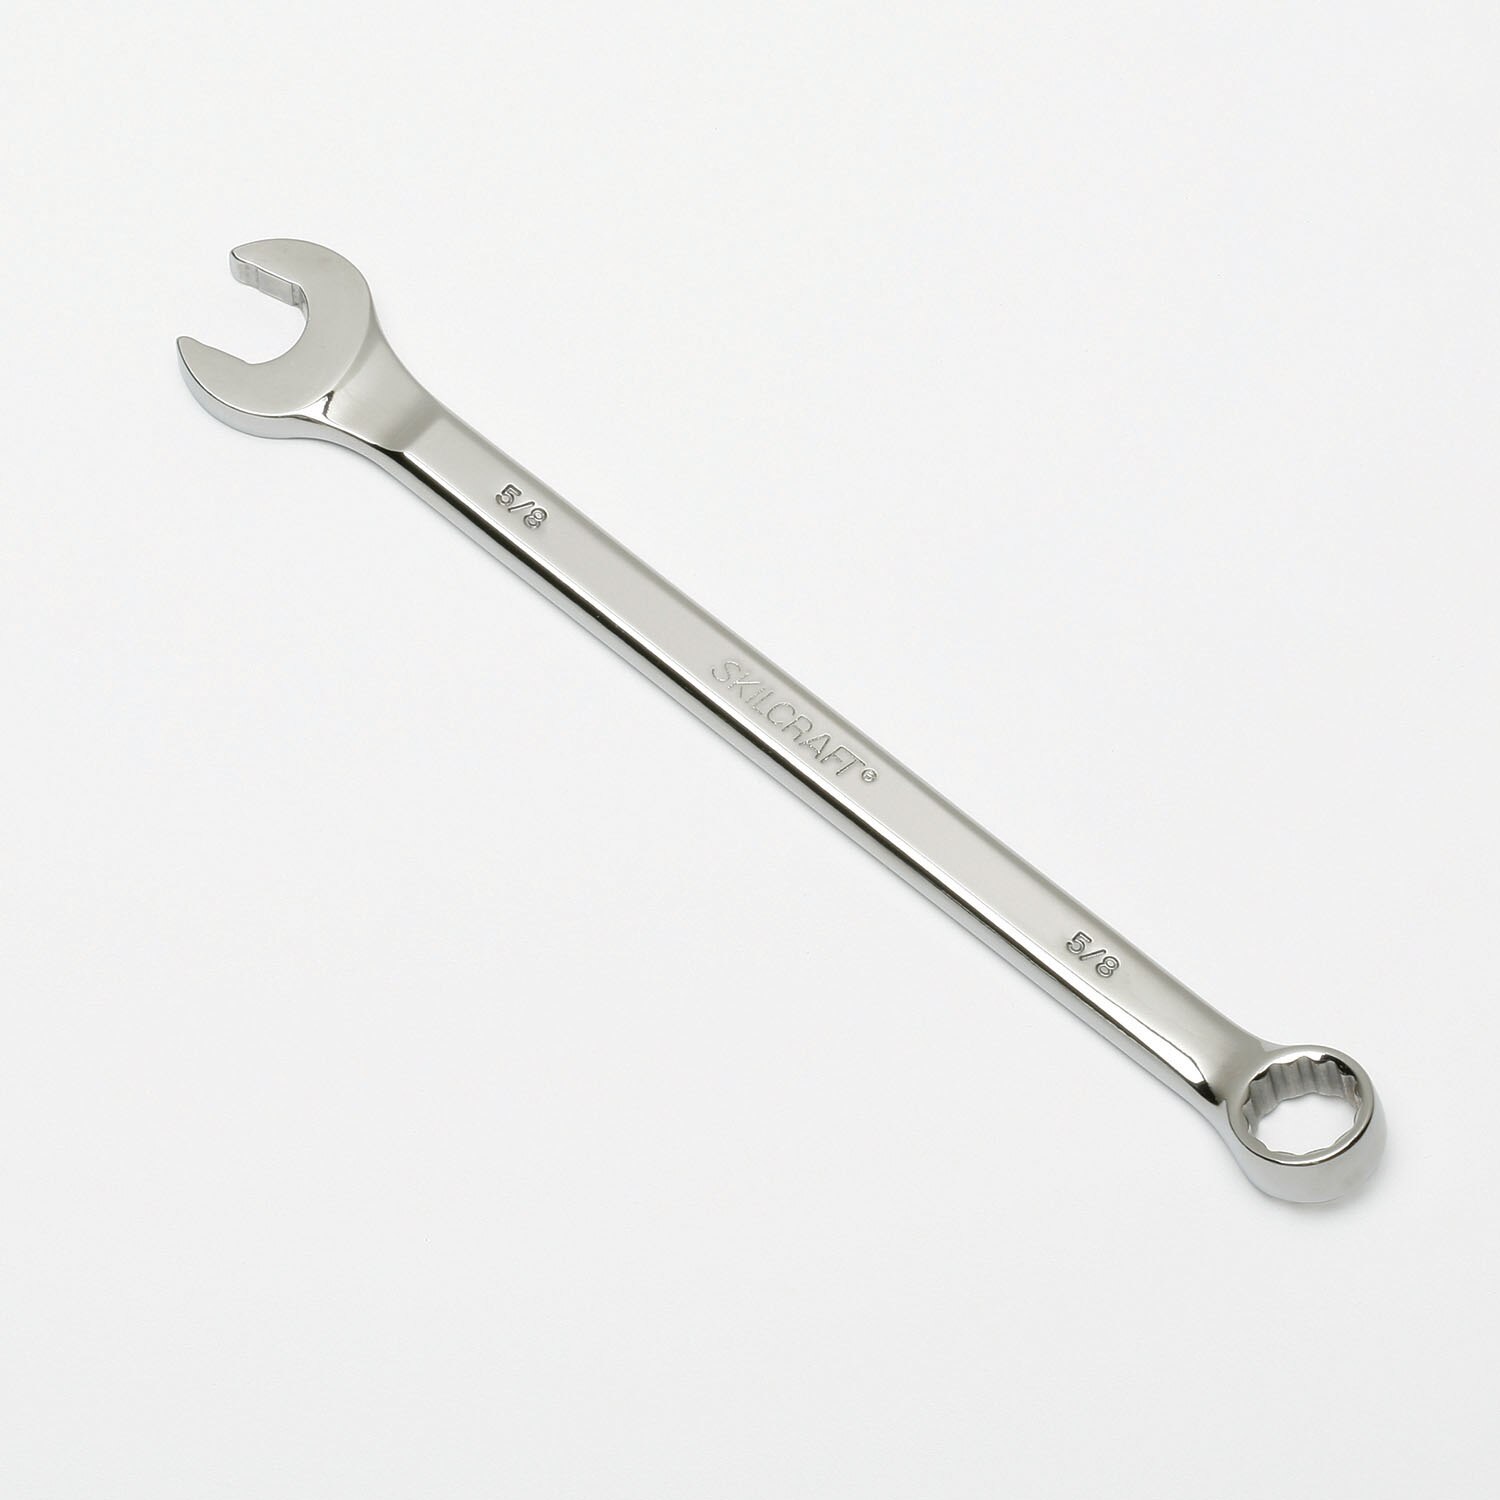 Wrench, Combination, Chrome, 12 Pt, 5/8"